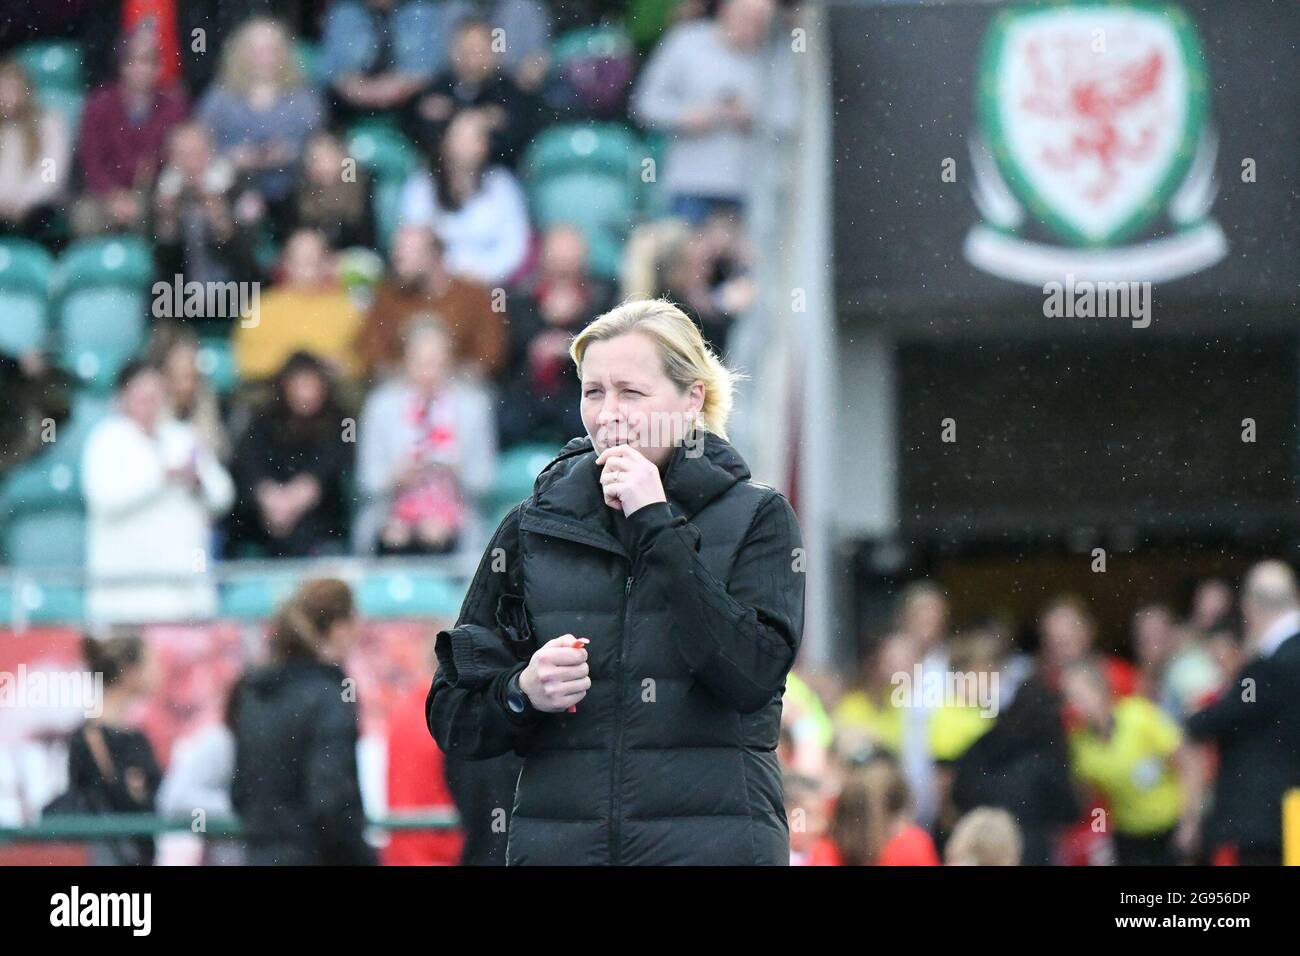 Cardiff, Wales. 4 June, 2019. Jayne Ludlow Head Coach of Wales Women before the Women's International Friendly match between Wales Women and New Zealand Women at Cardiff International Sports Campus, Cardiff, Wales on 4 June, 2019. Credit: Duncan Thomas/Majestic Media. Stock Photo